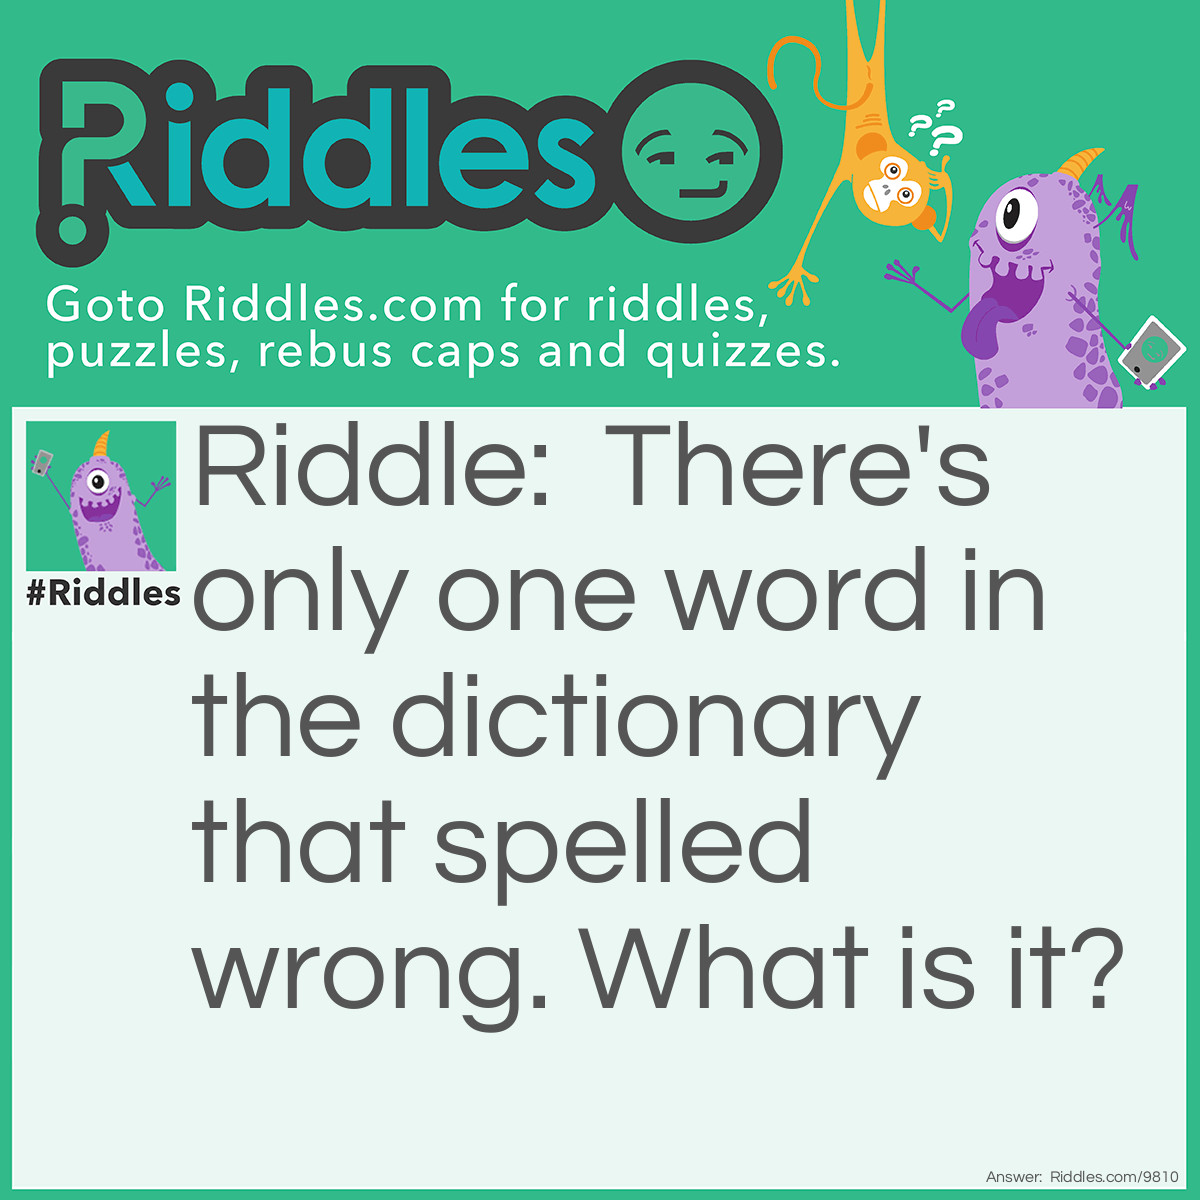 Riddle: There's only one word in the dictionary that spelled wrong. What is it? Answer: The word “wrong is the only word that makes the word ...W-R-O-N-G...